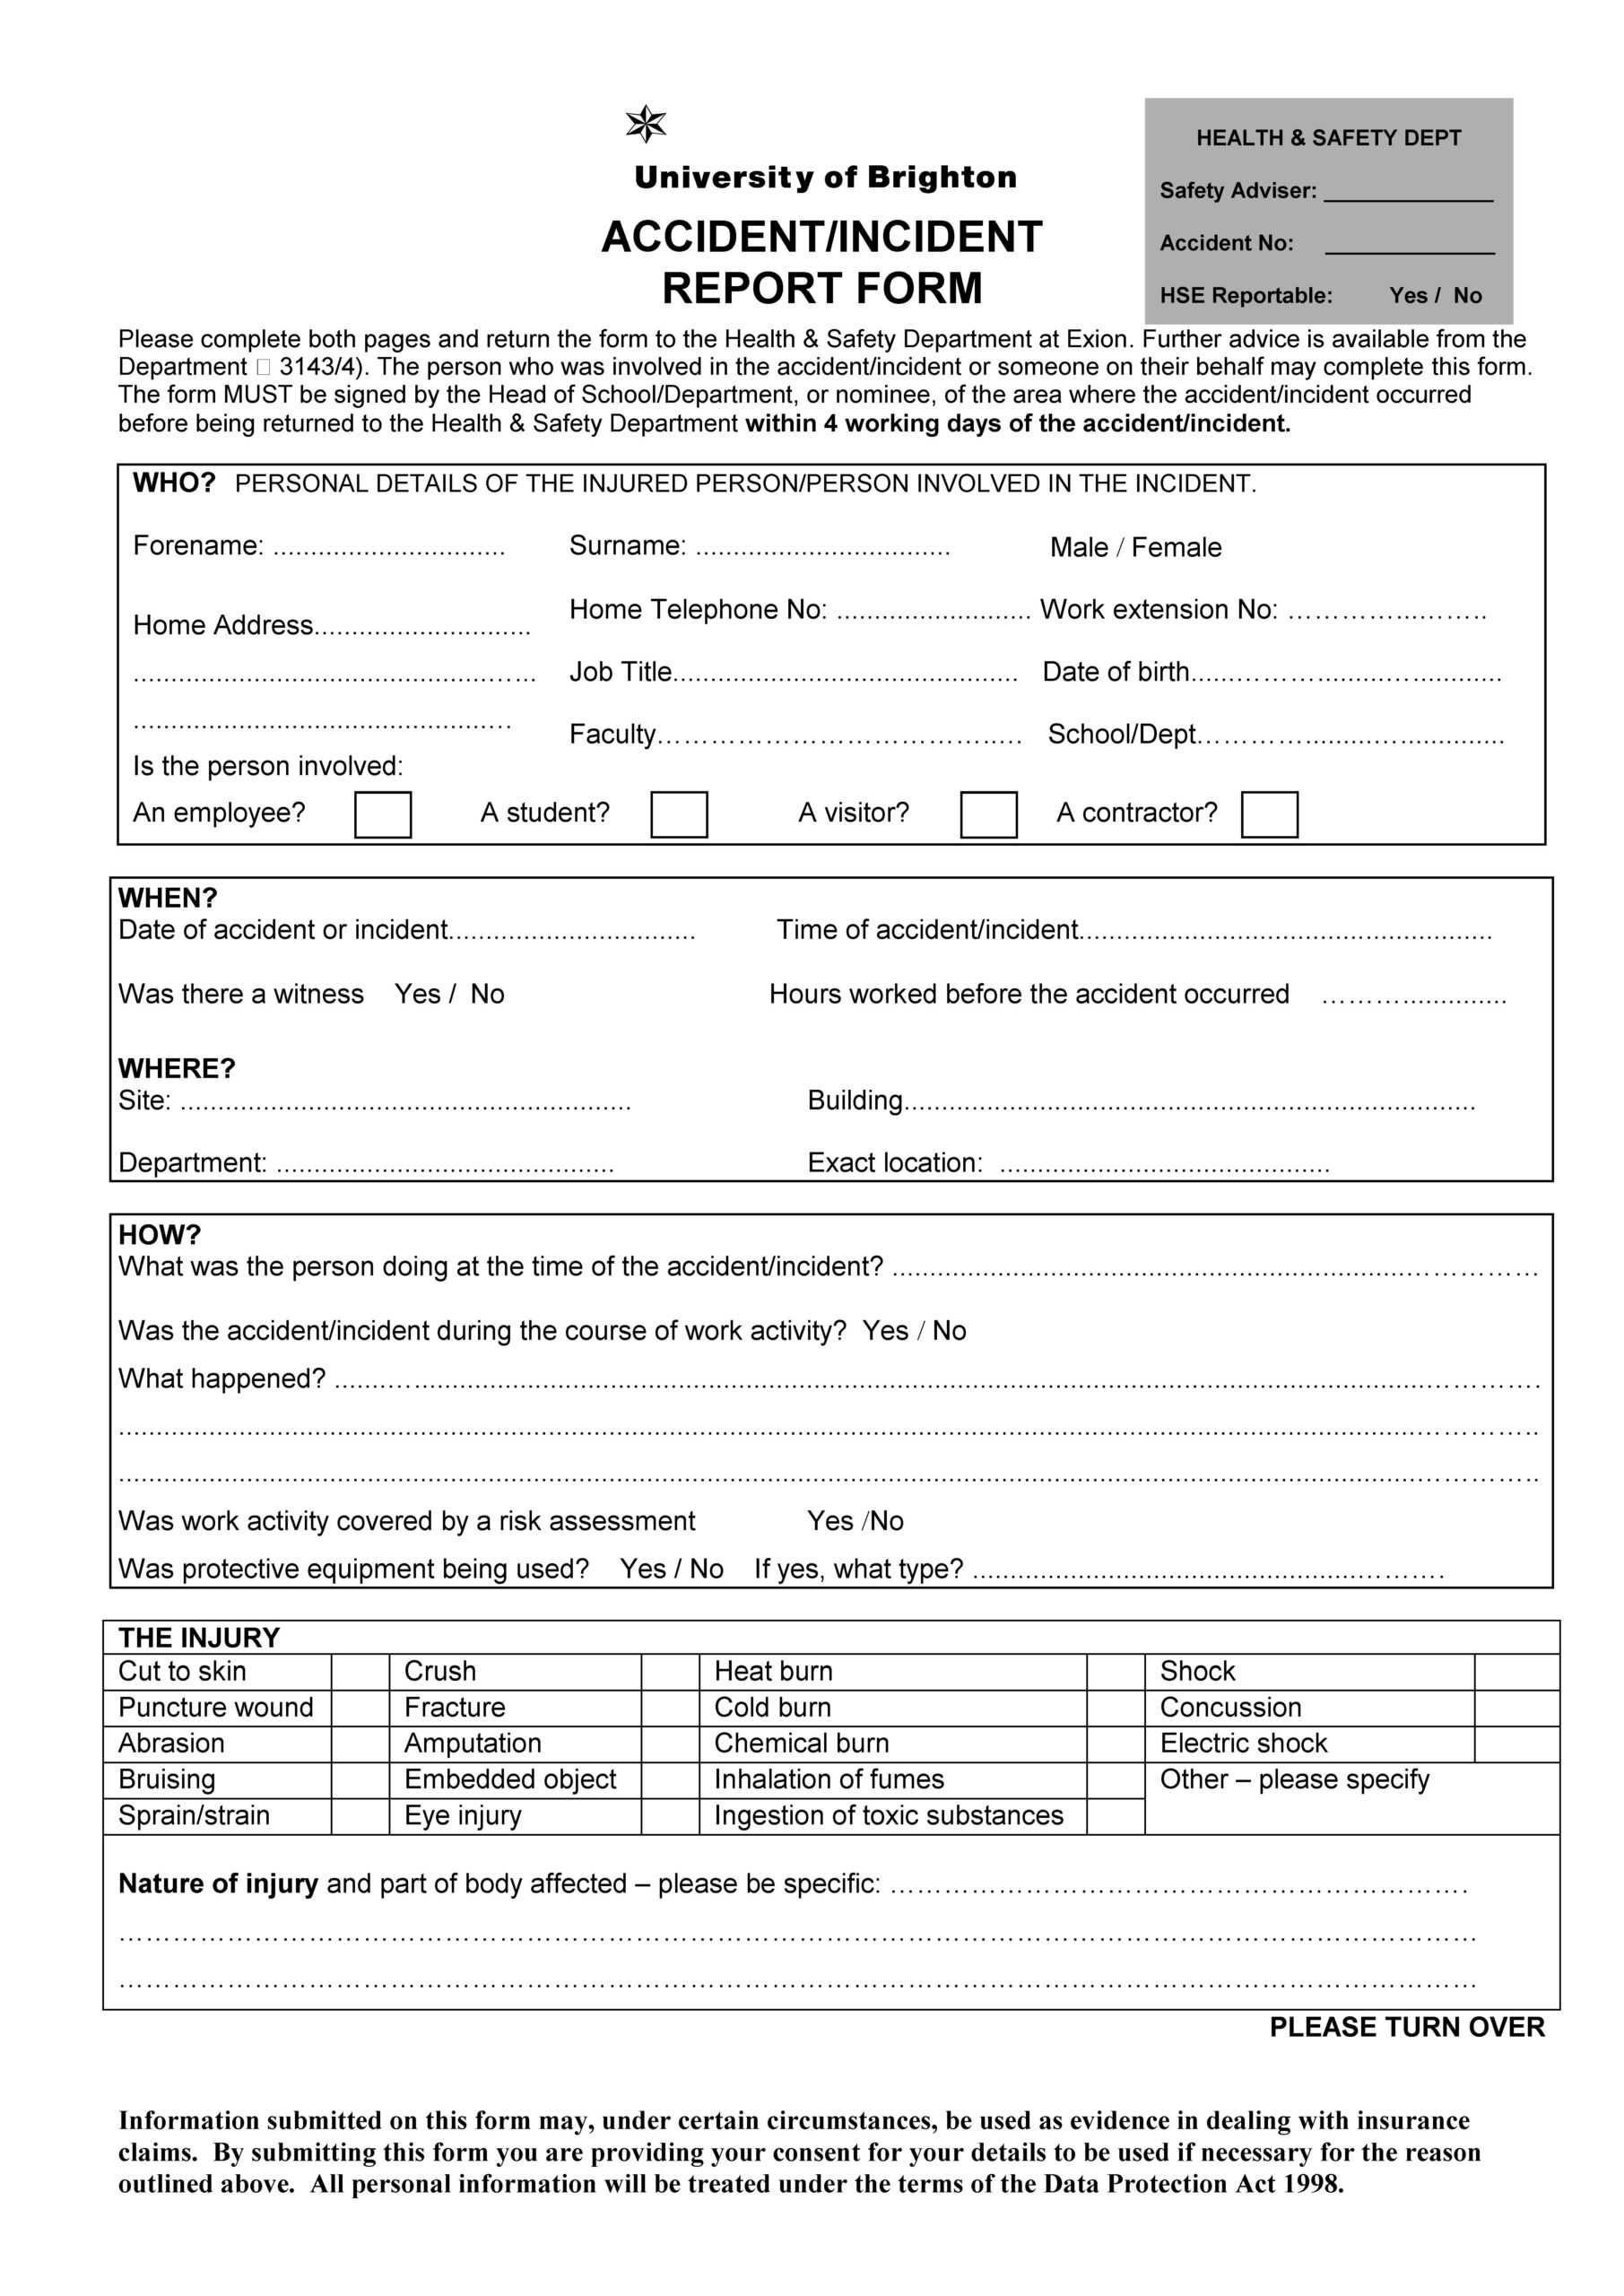 Accident Report Form Template Uk ] – 585650 Incident Report Inside Accident Report Form Template Uk